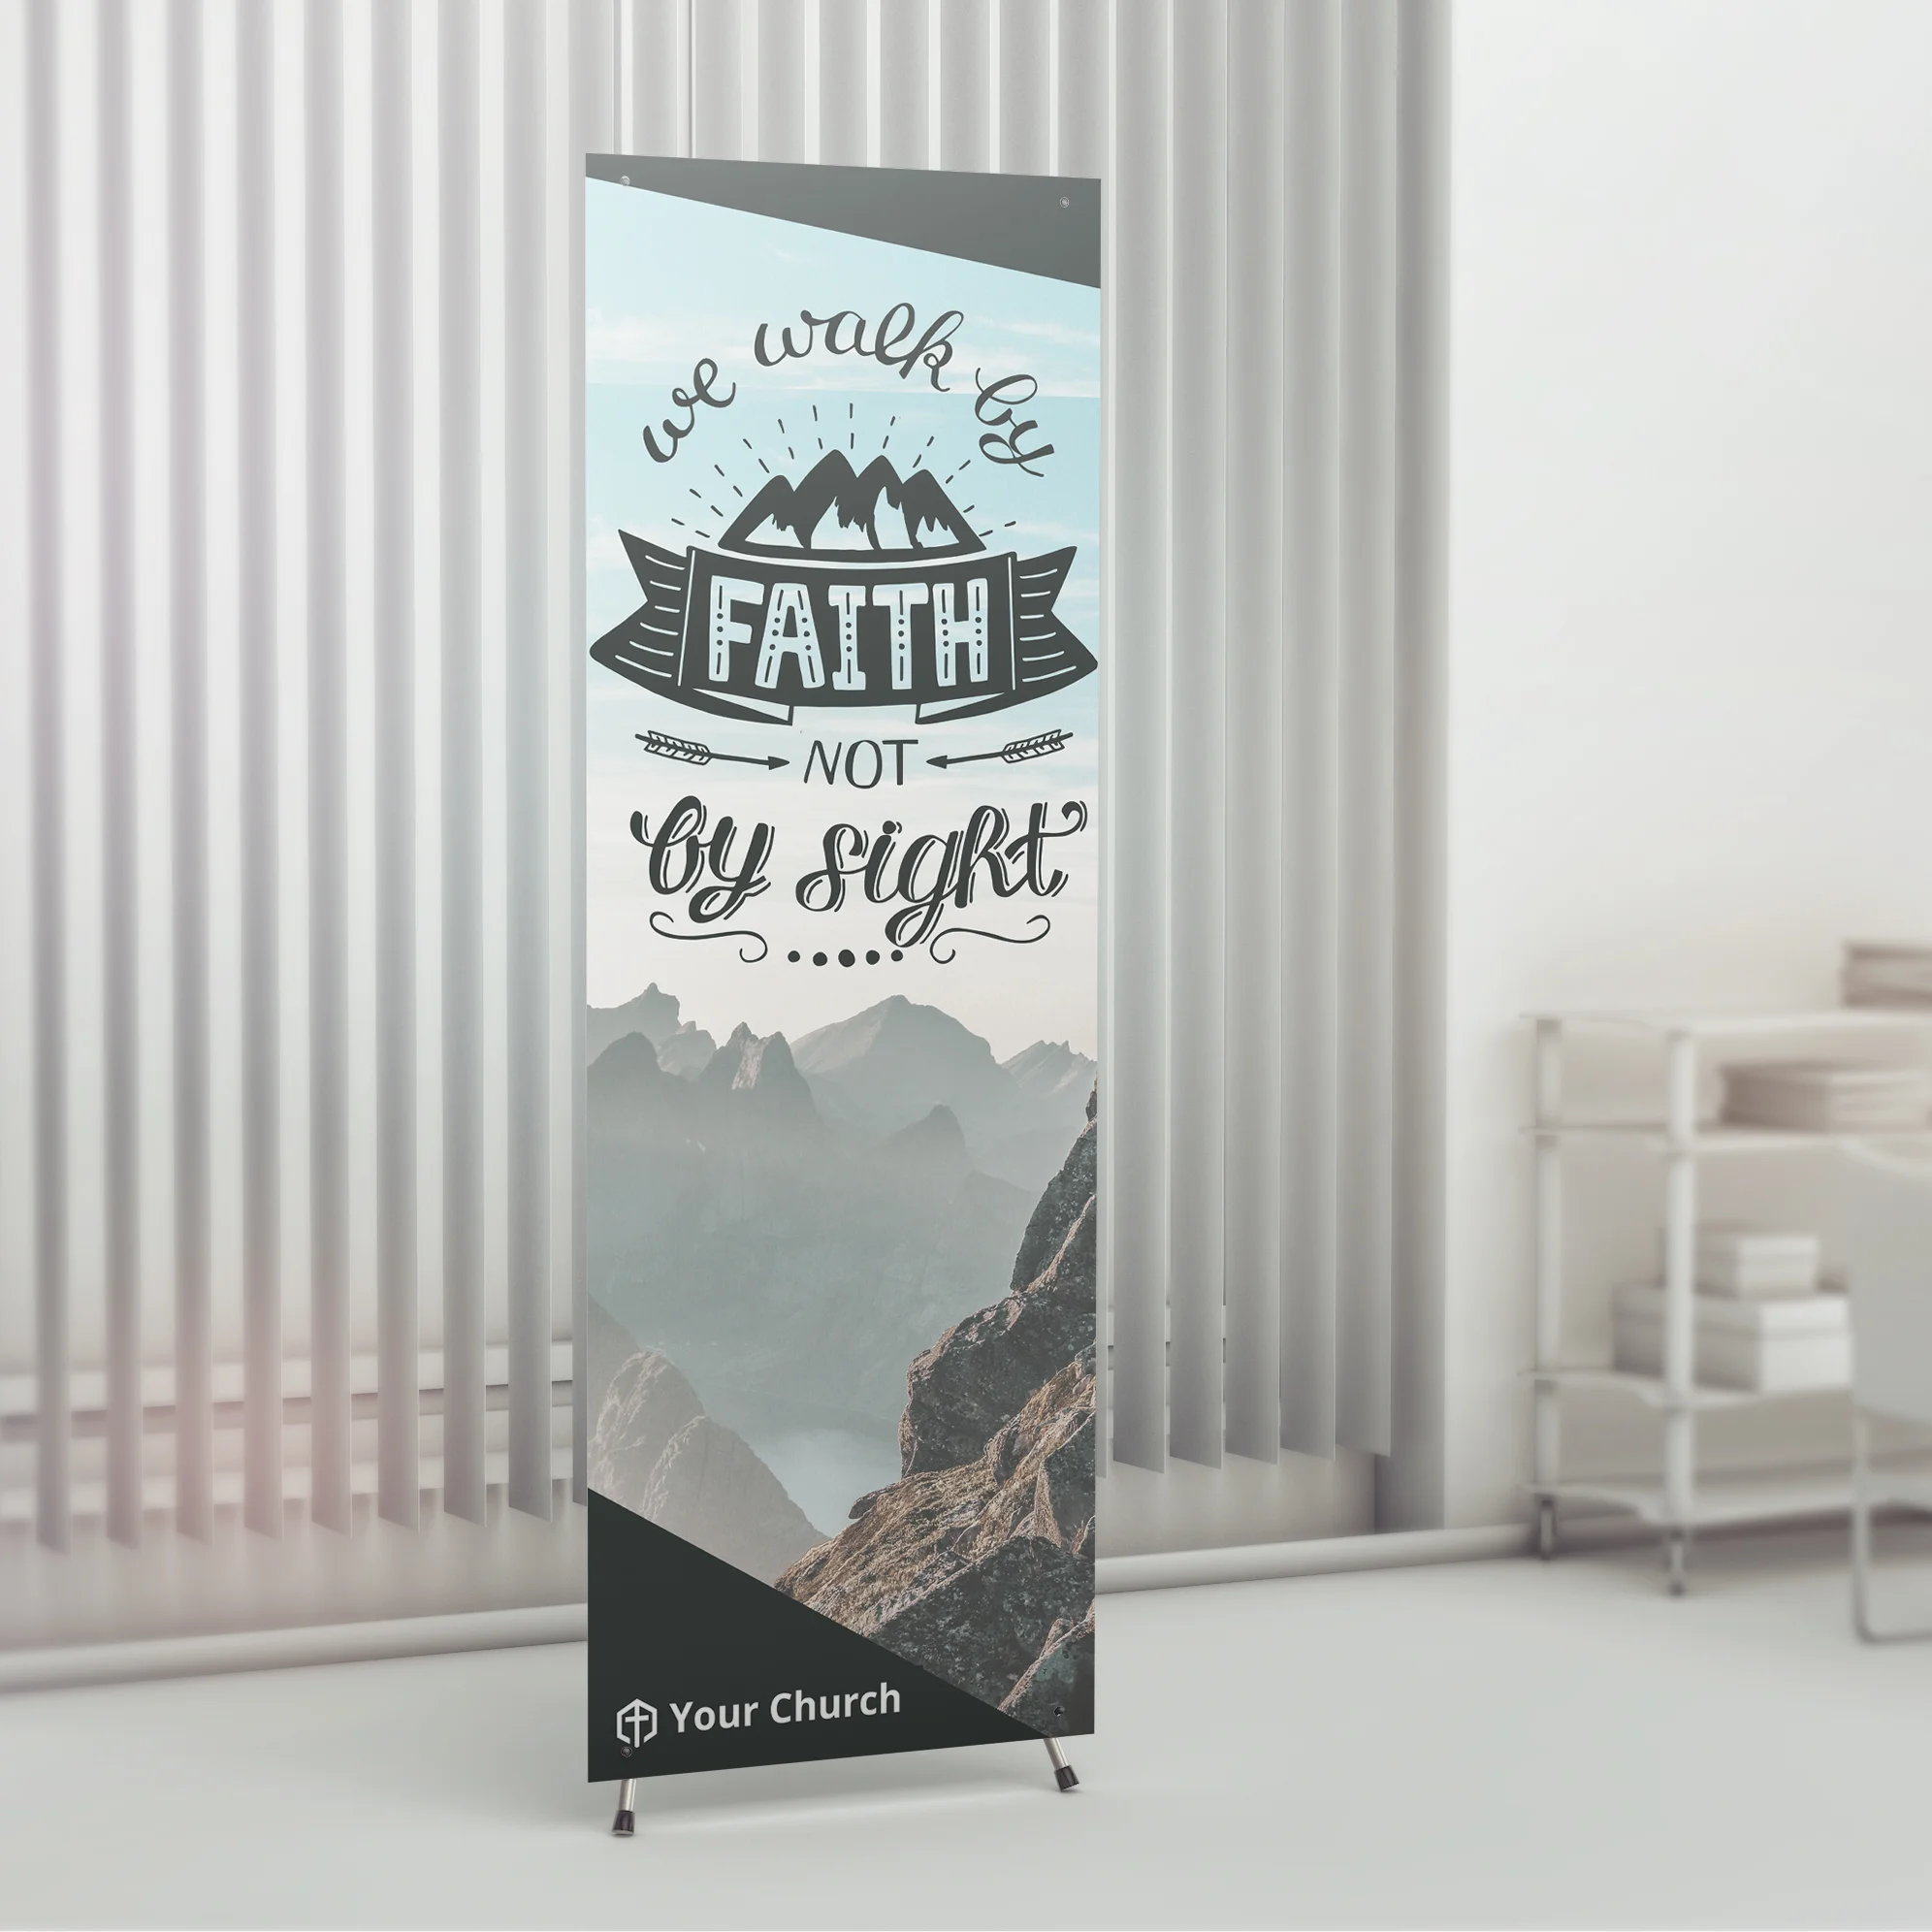 Free Church Banner Bible Theme by Ministry Voice